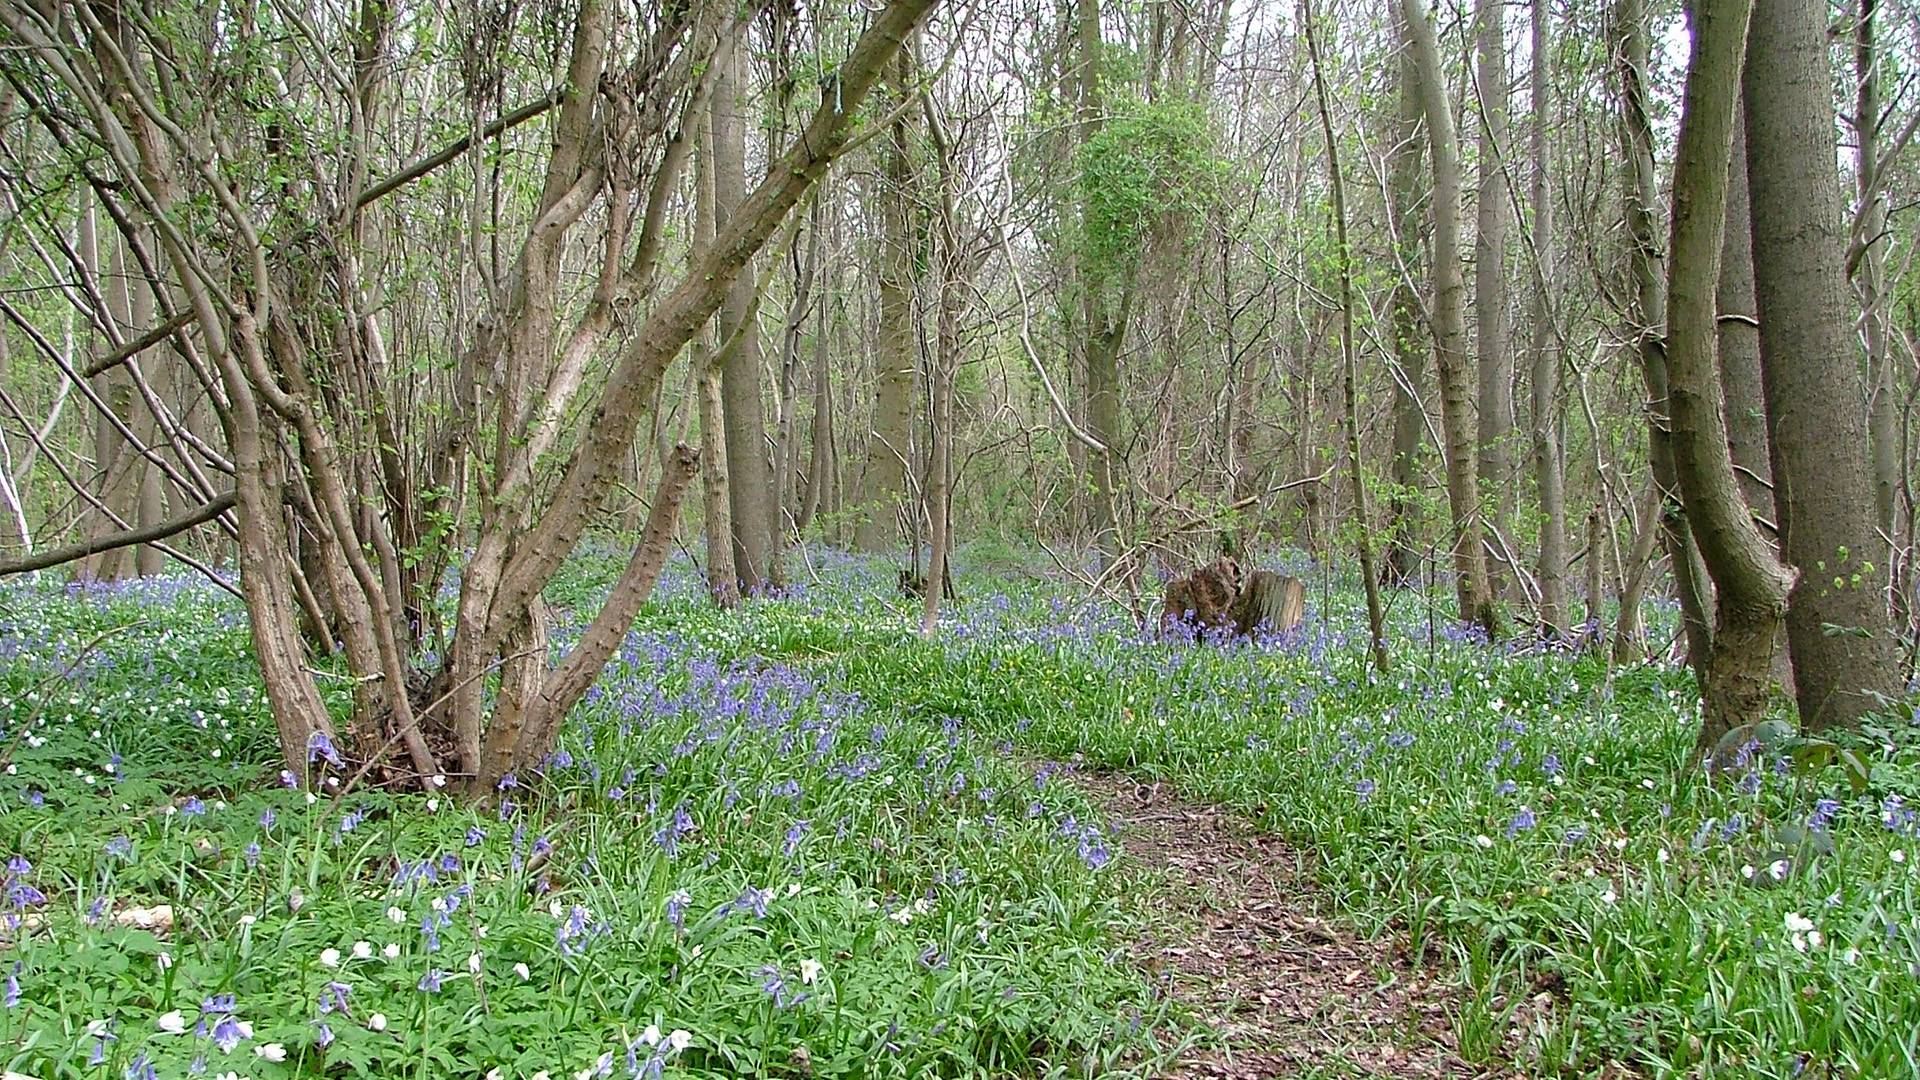 Limewoods National Nature Reserve